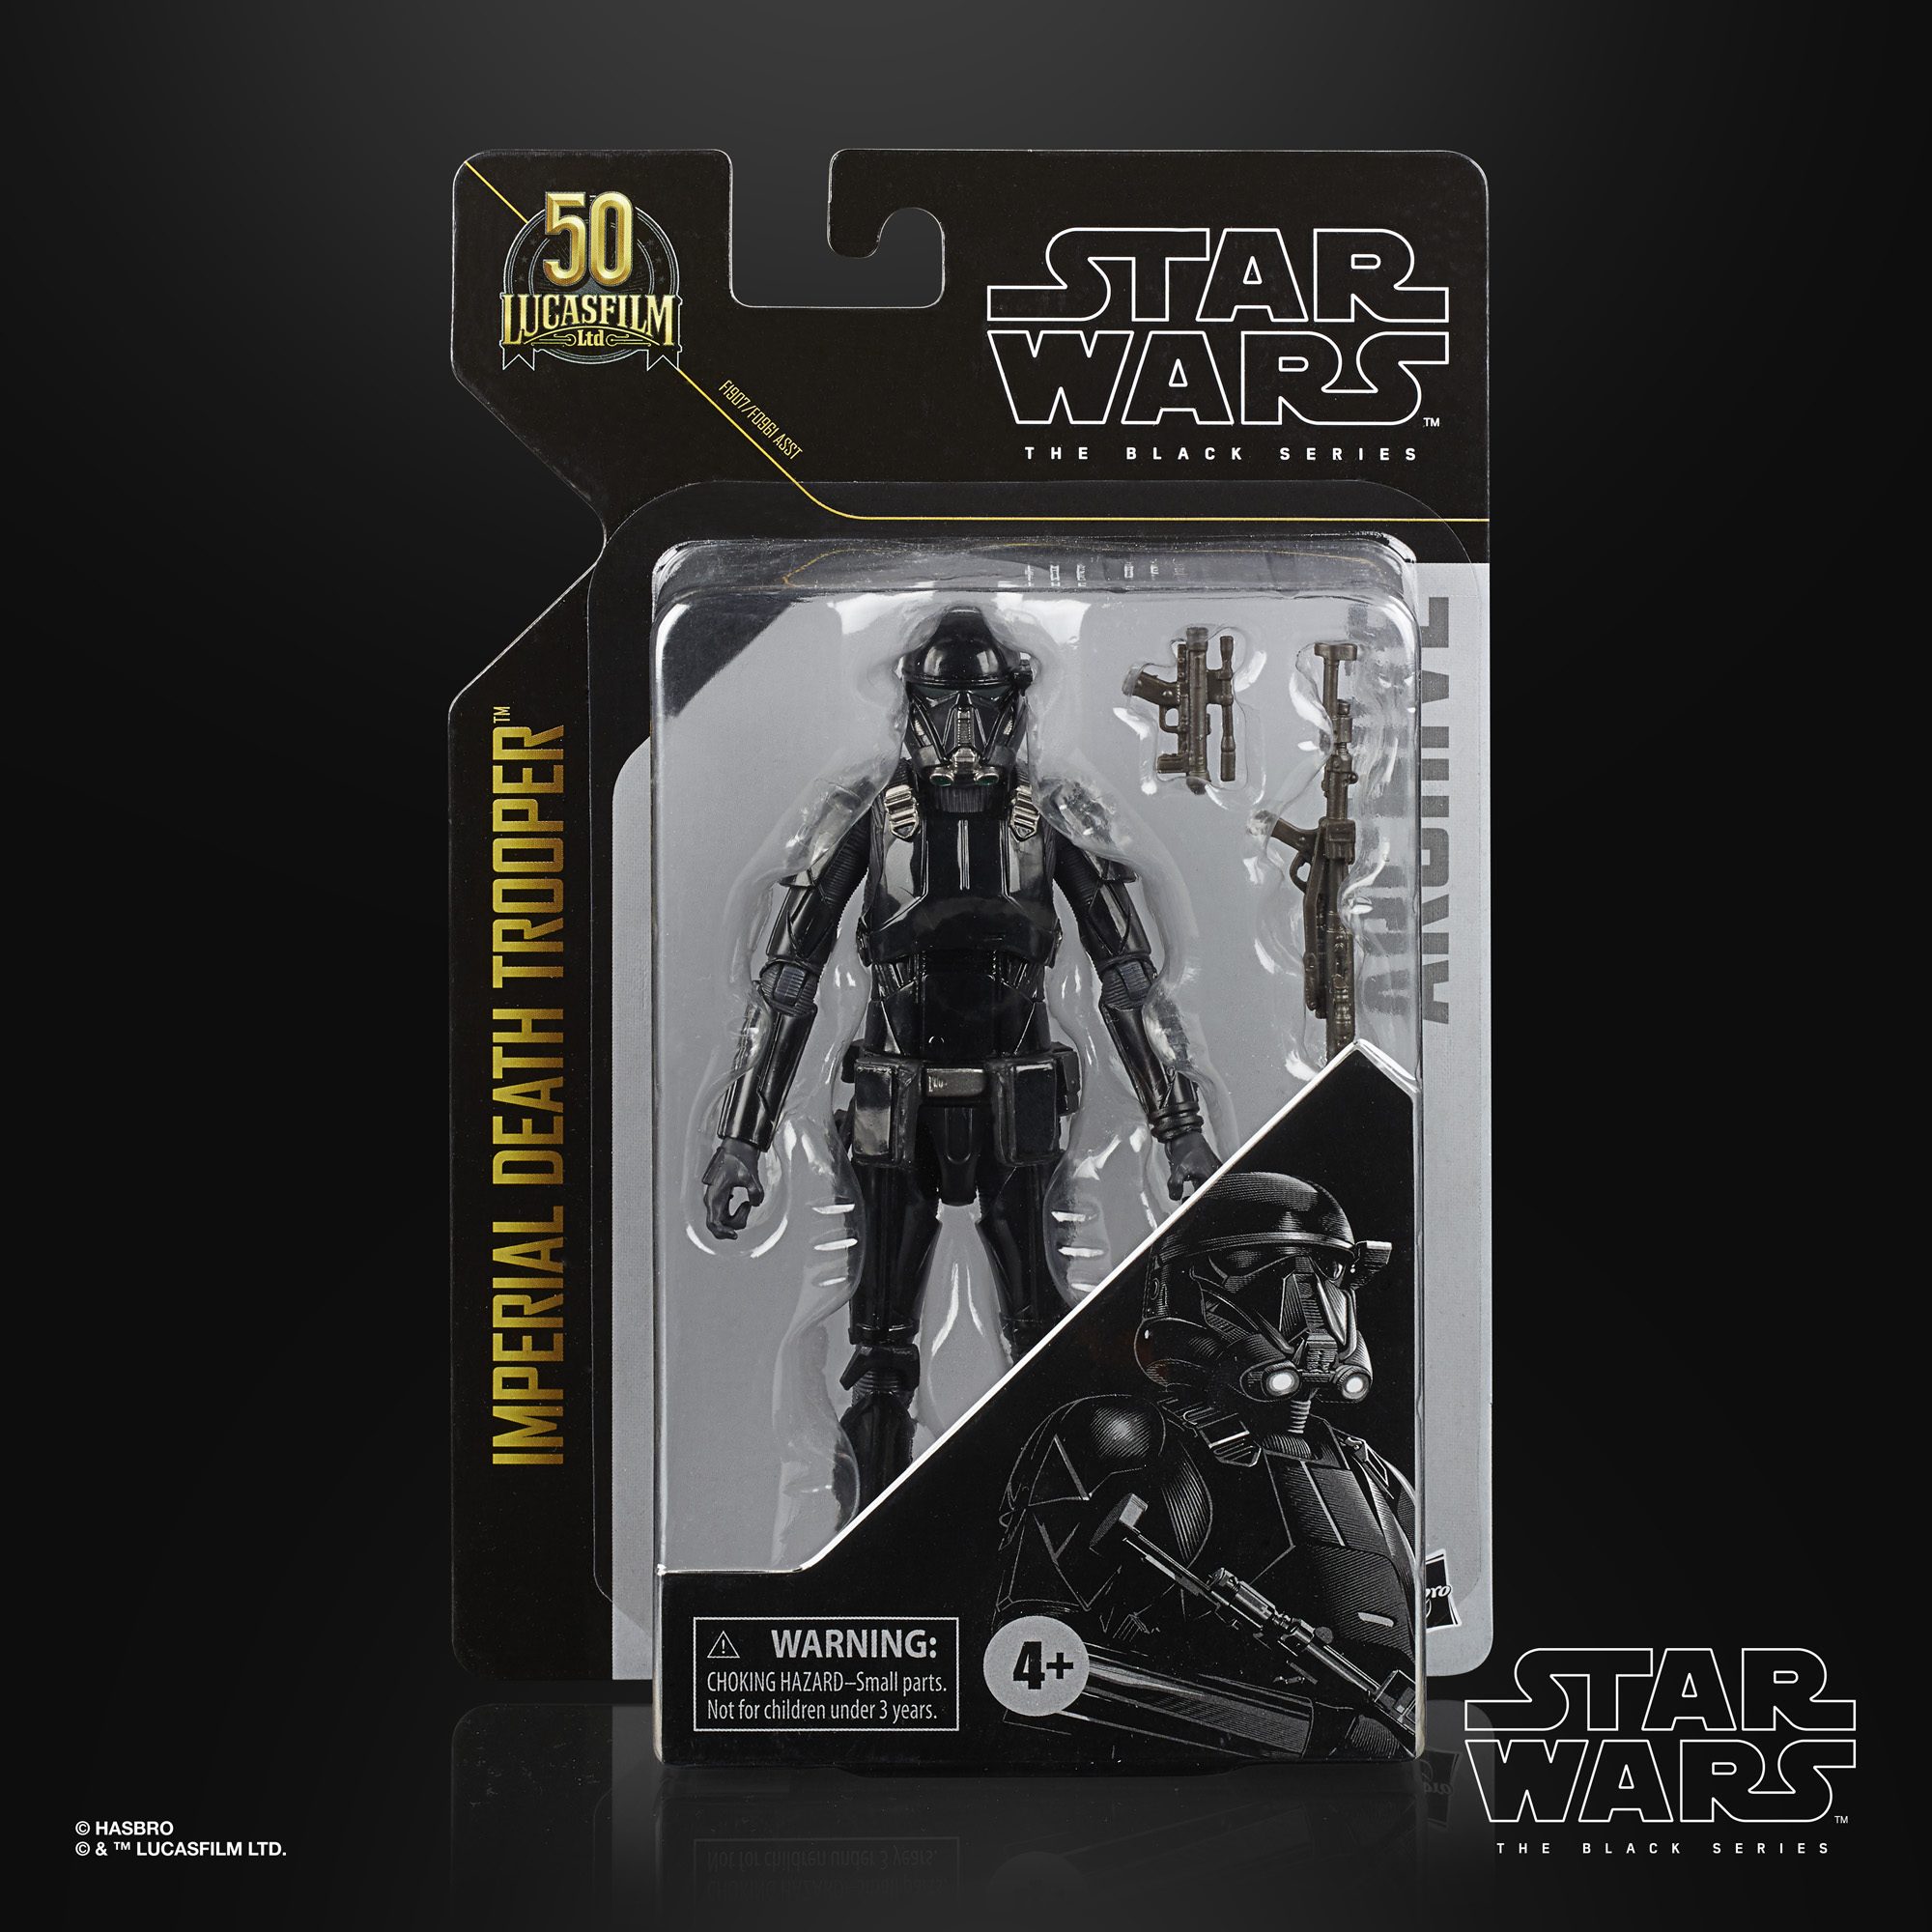 Star Wars The Black Series Archive Line Archive Imperial Death Trooper 15cm F19075L00 5010993825417 